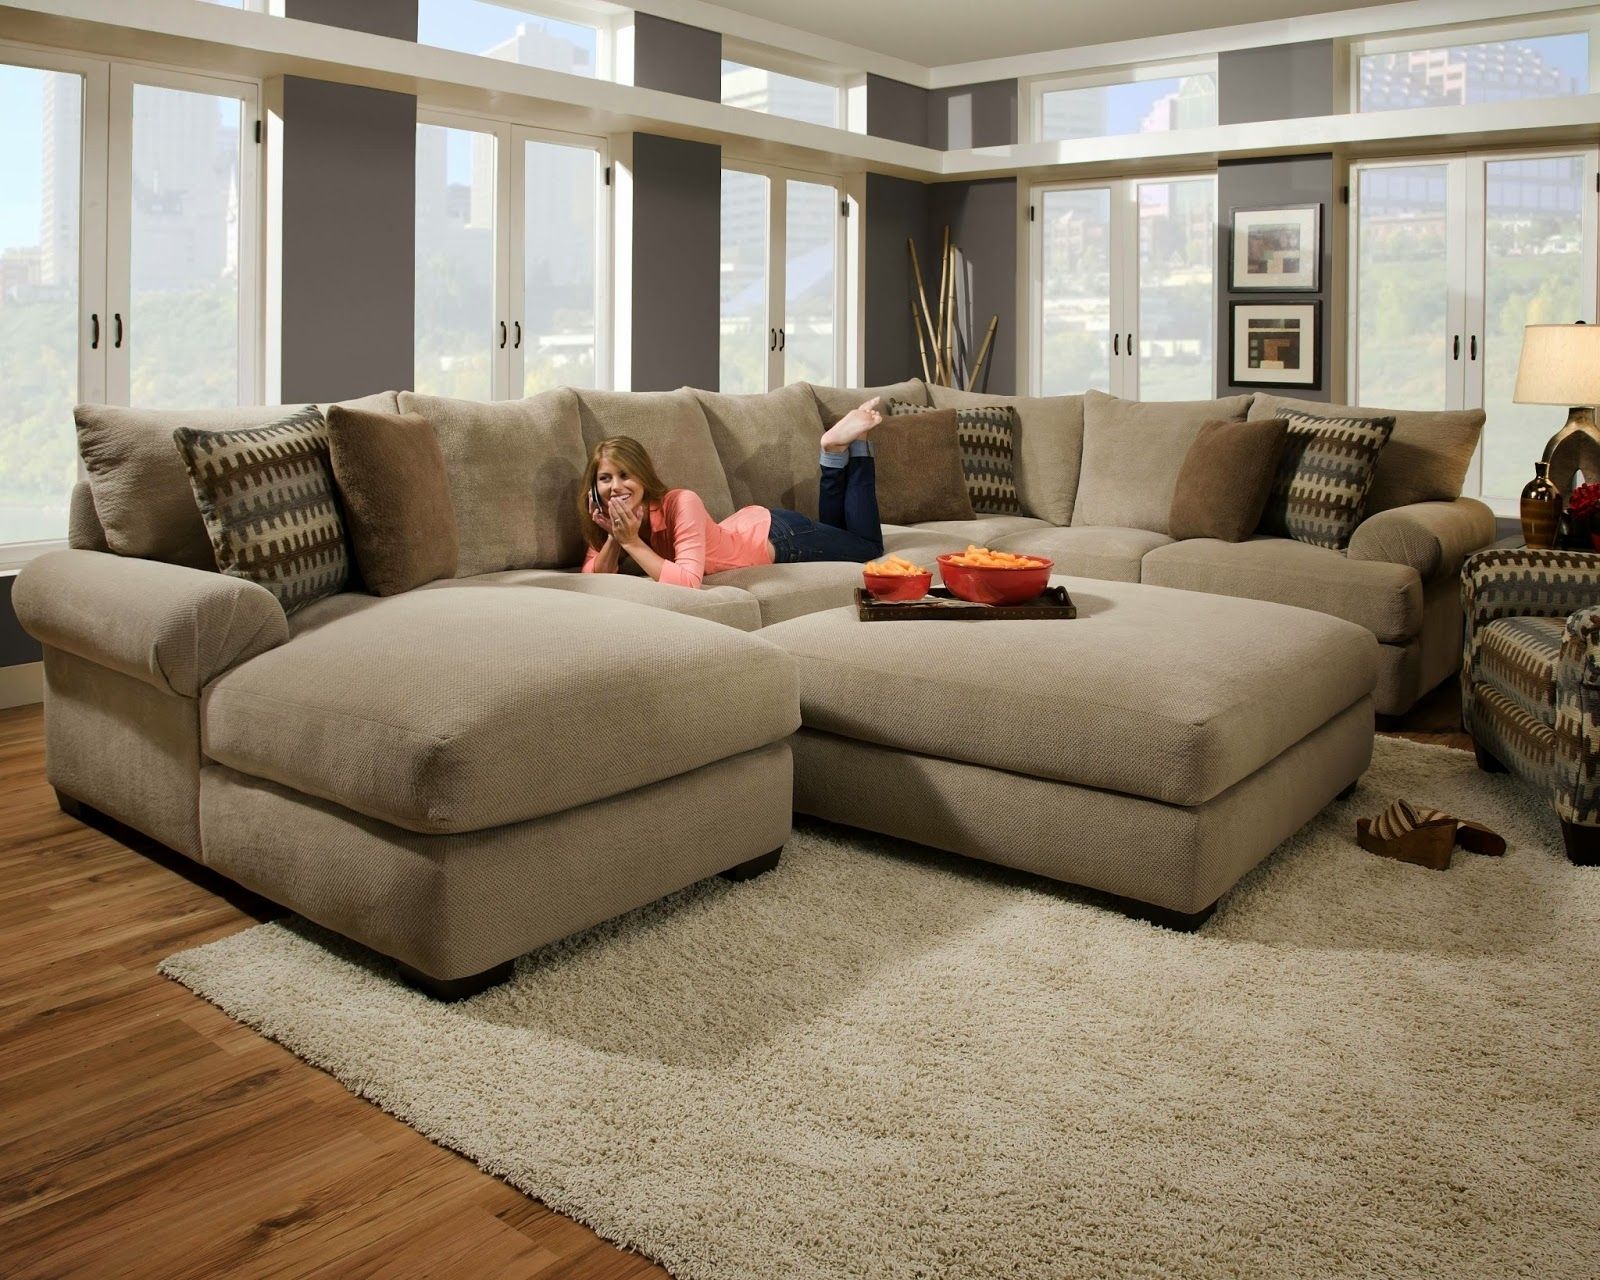 How To Configure A Sectional Sofa – Image To U Within Microfiber Sectional Corner Sofas (Gallery 16 of 20)